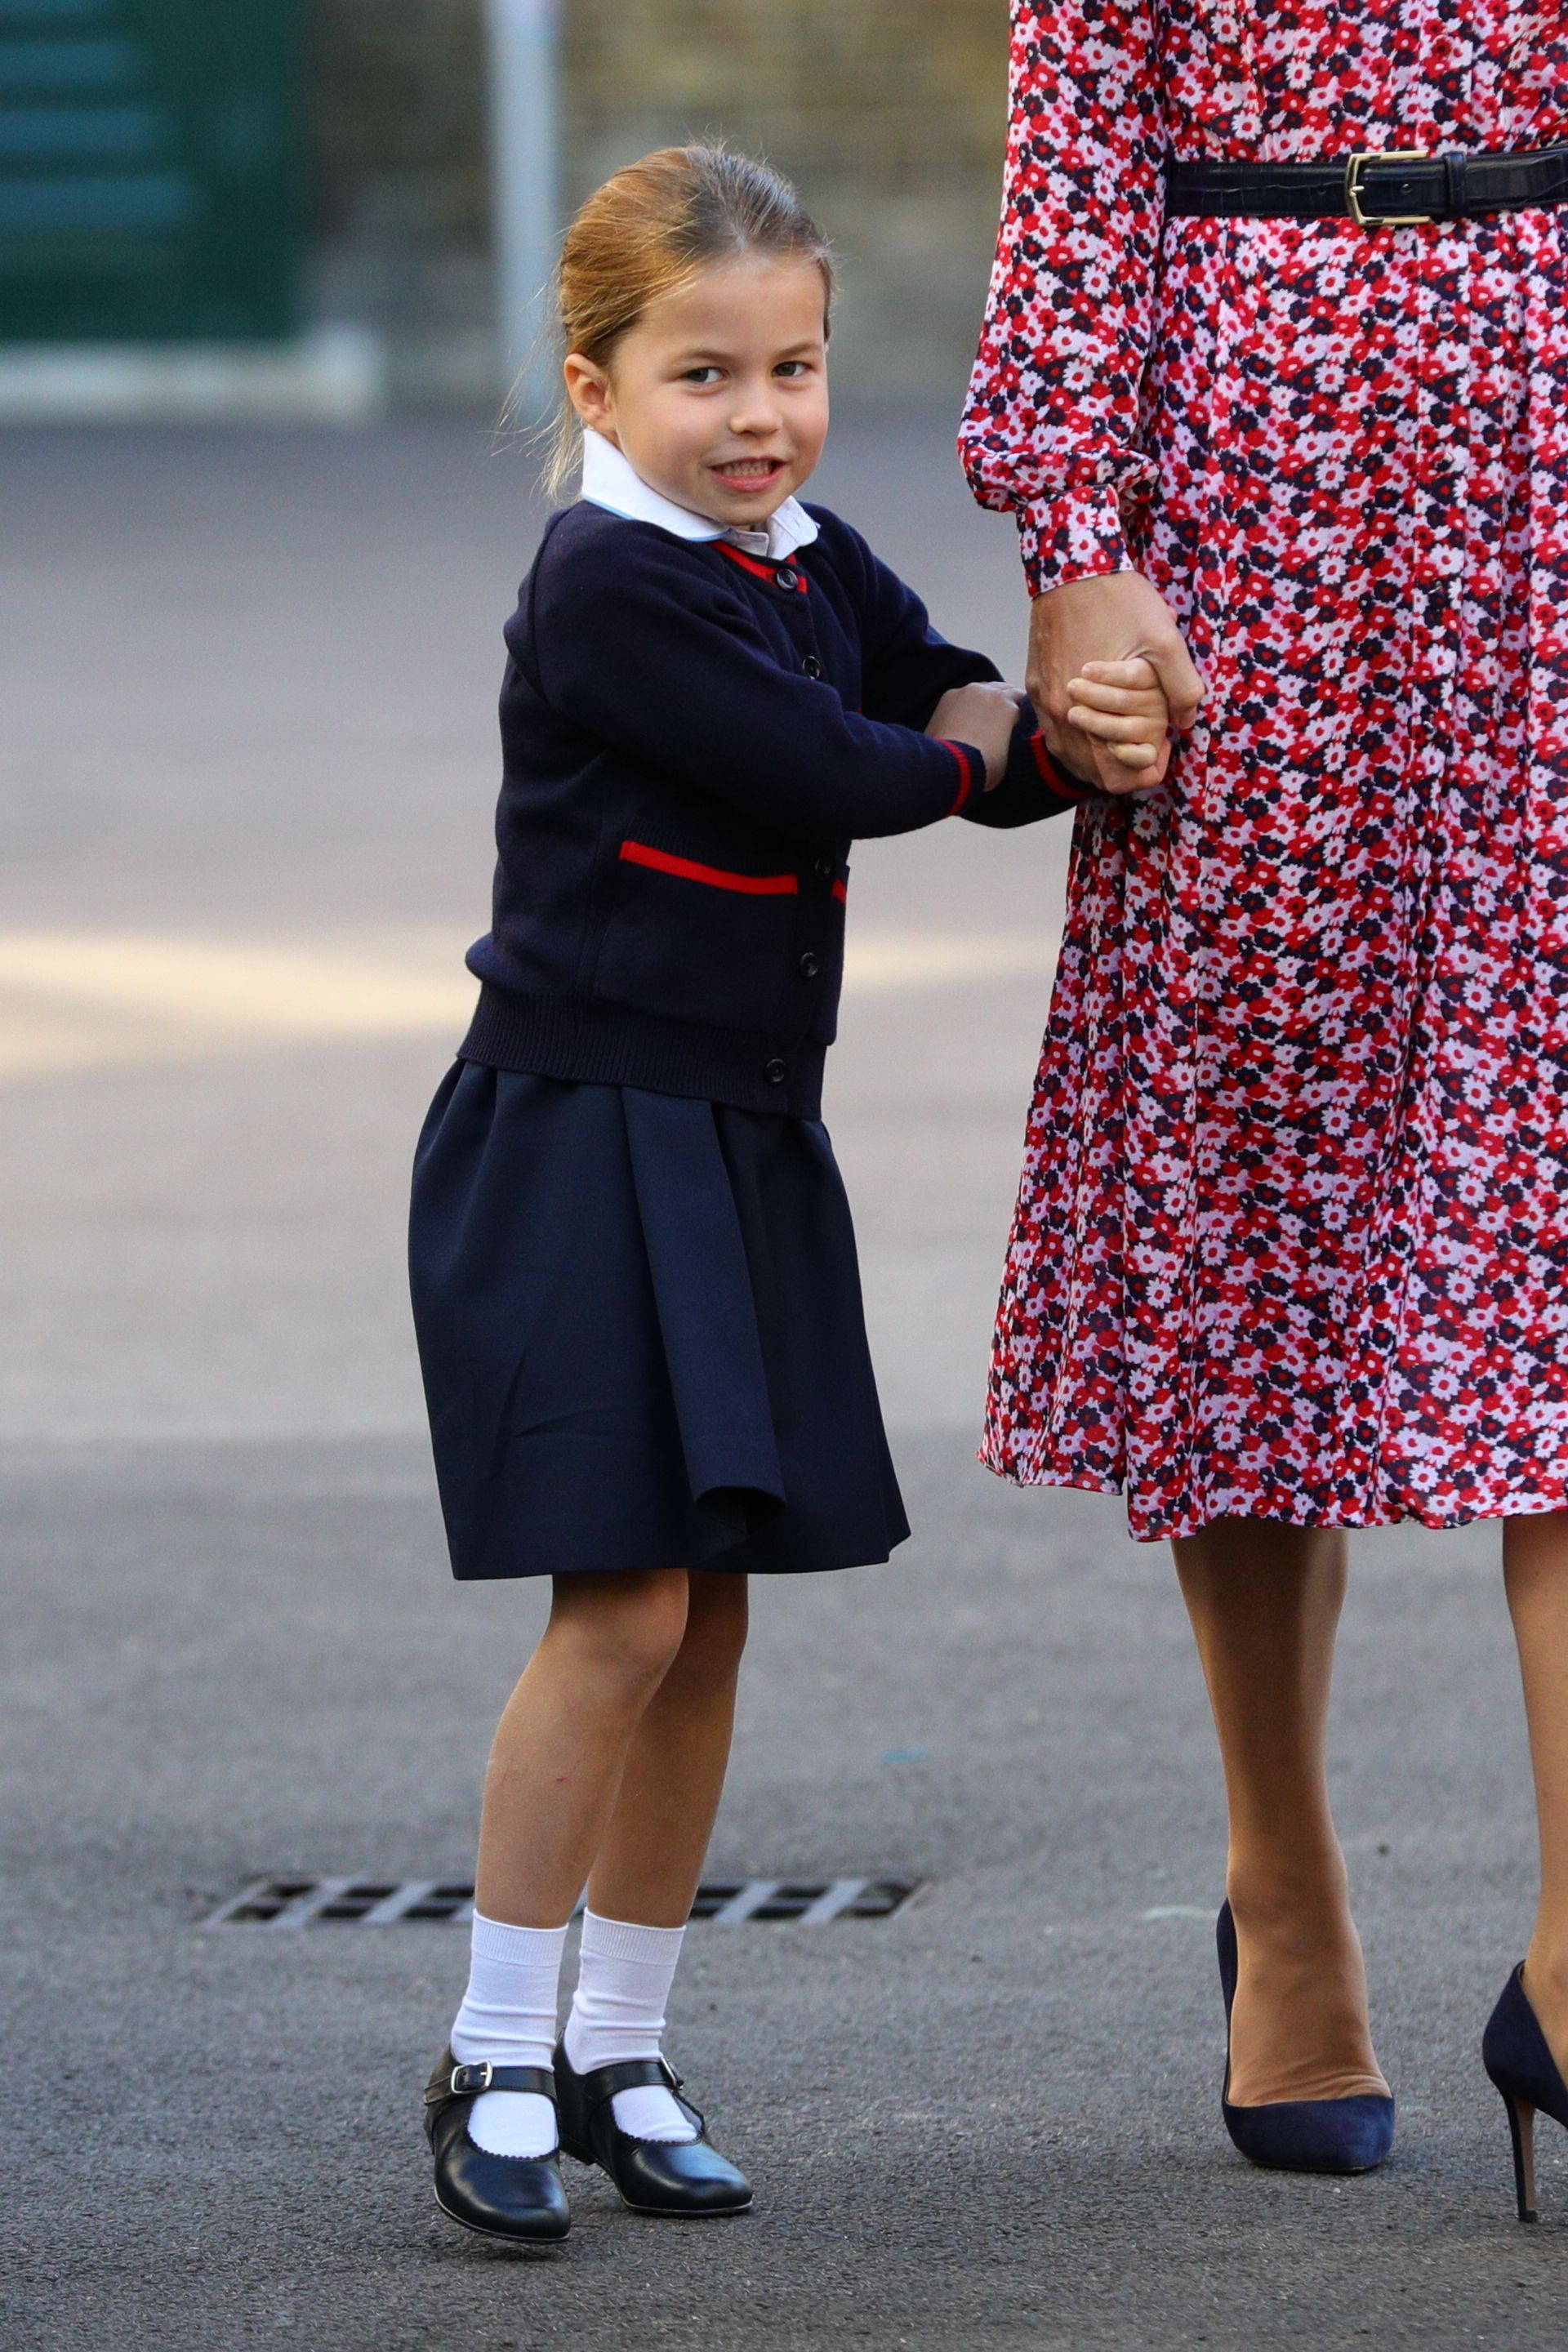 Princess Charlotte will go by a different name at school